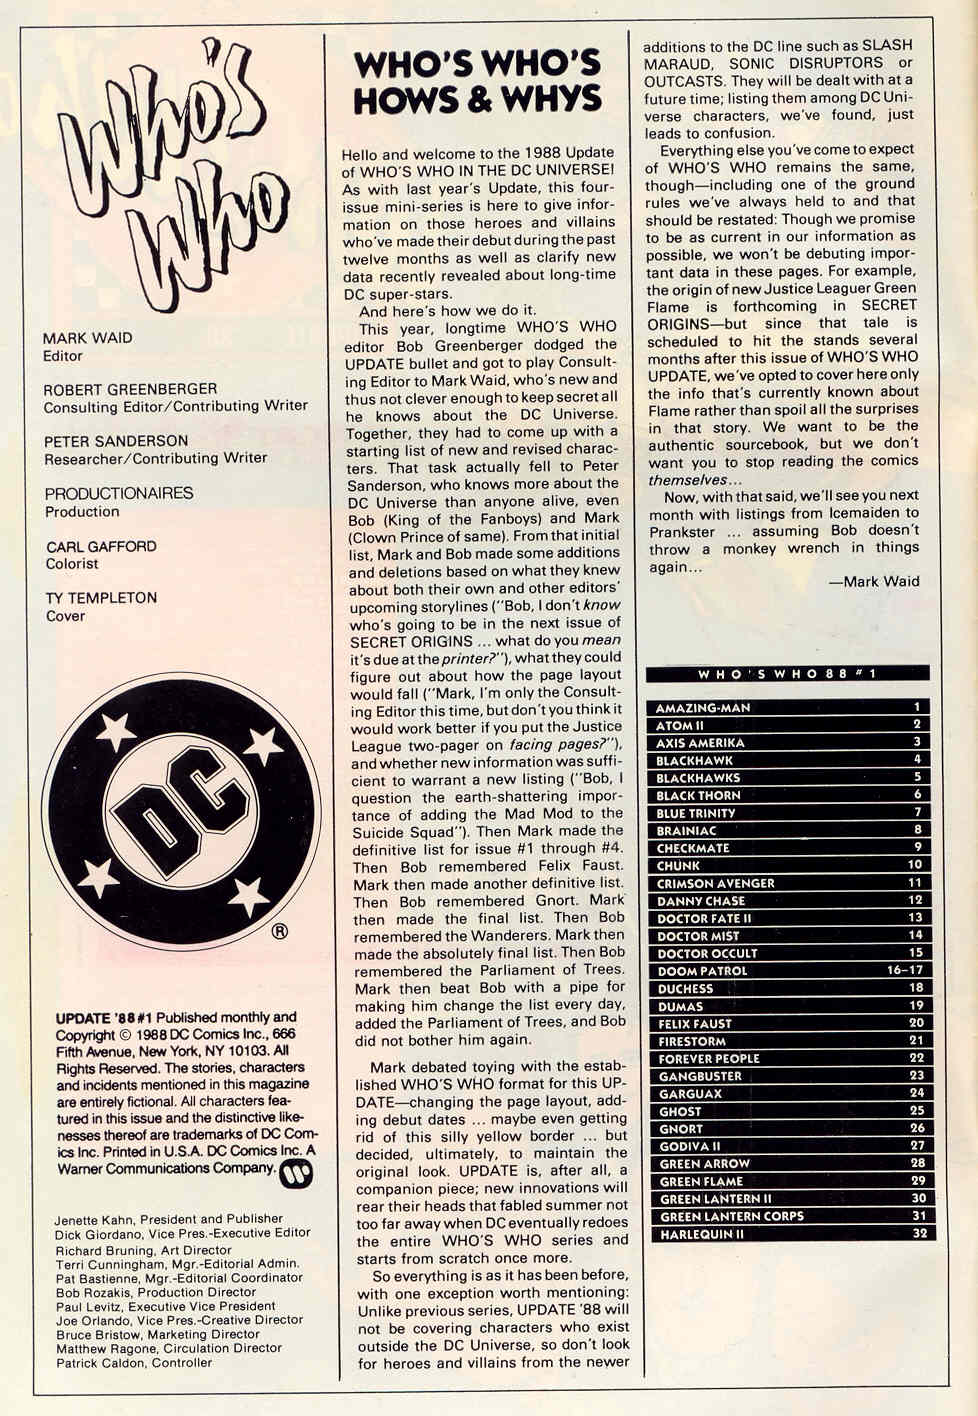 Read online Who's Who: Update '88 comic -  Issue #1 - 3